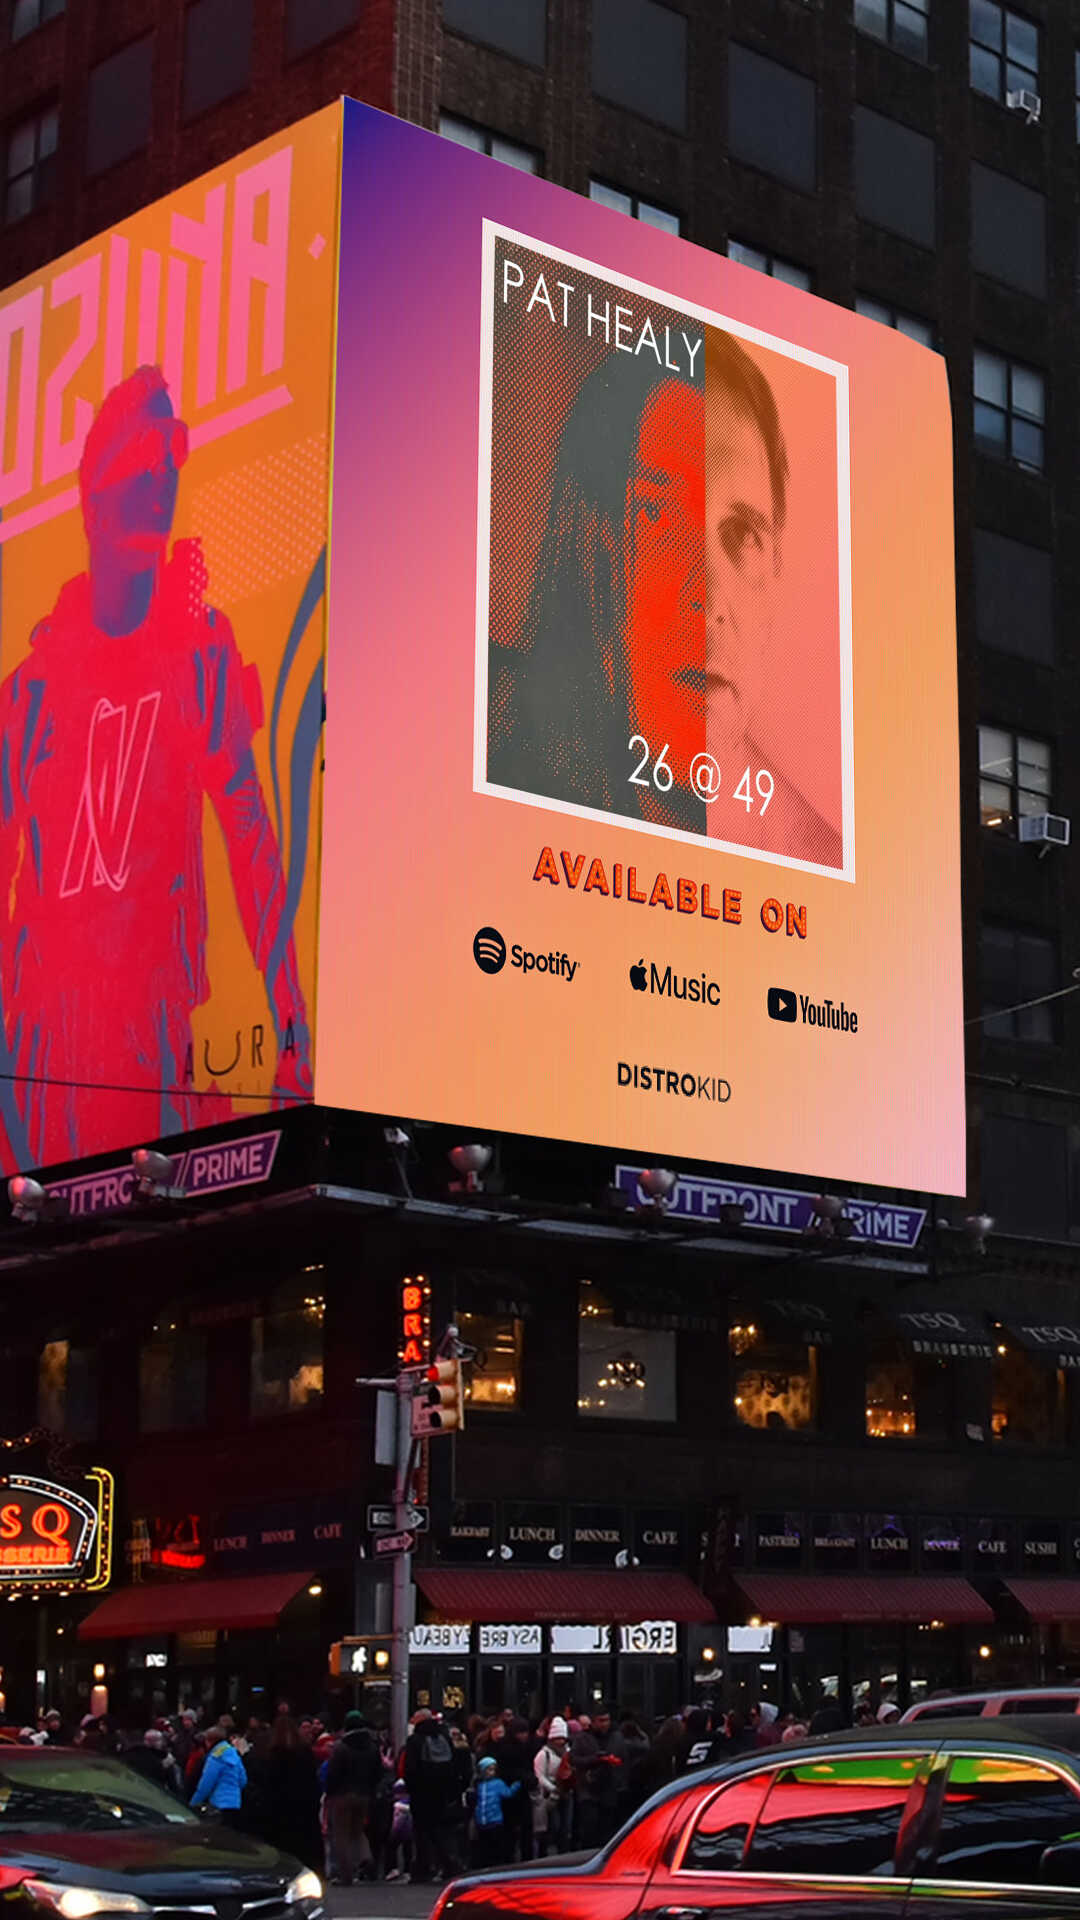 A doctored image of Times Square in New York City shows your album release on a huge billboard, just one of the many images that DistroKid sends to you to promote your music after you have released it with them.